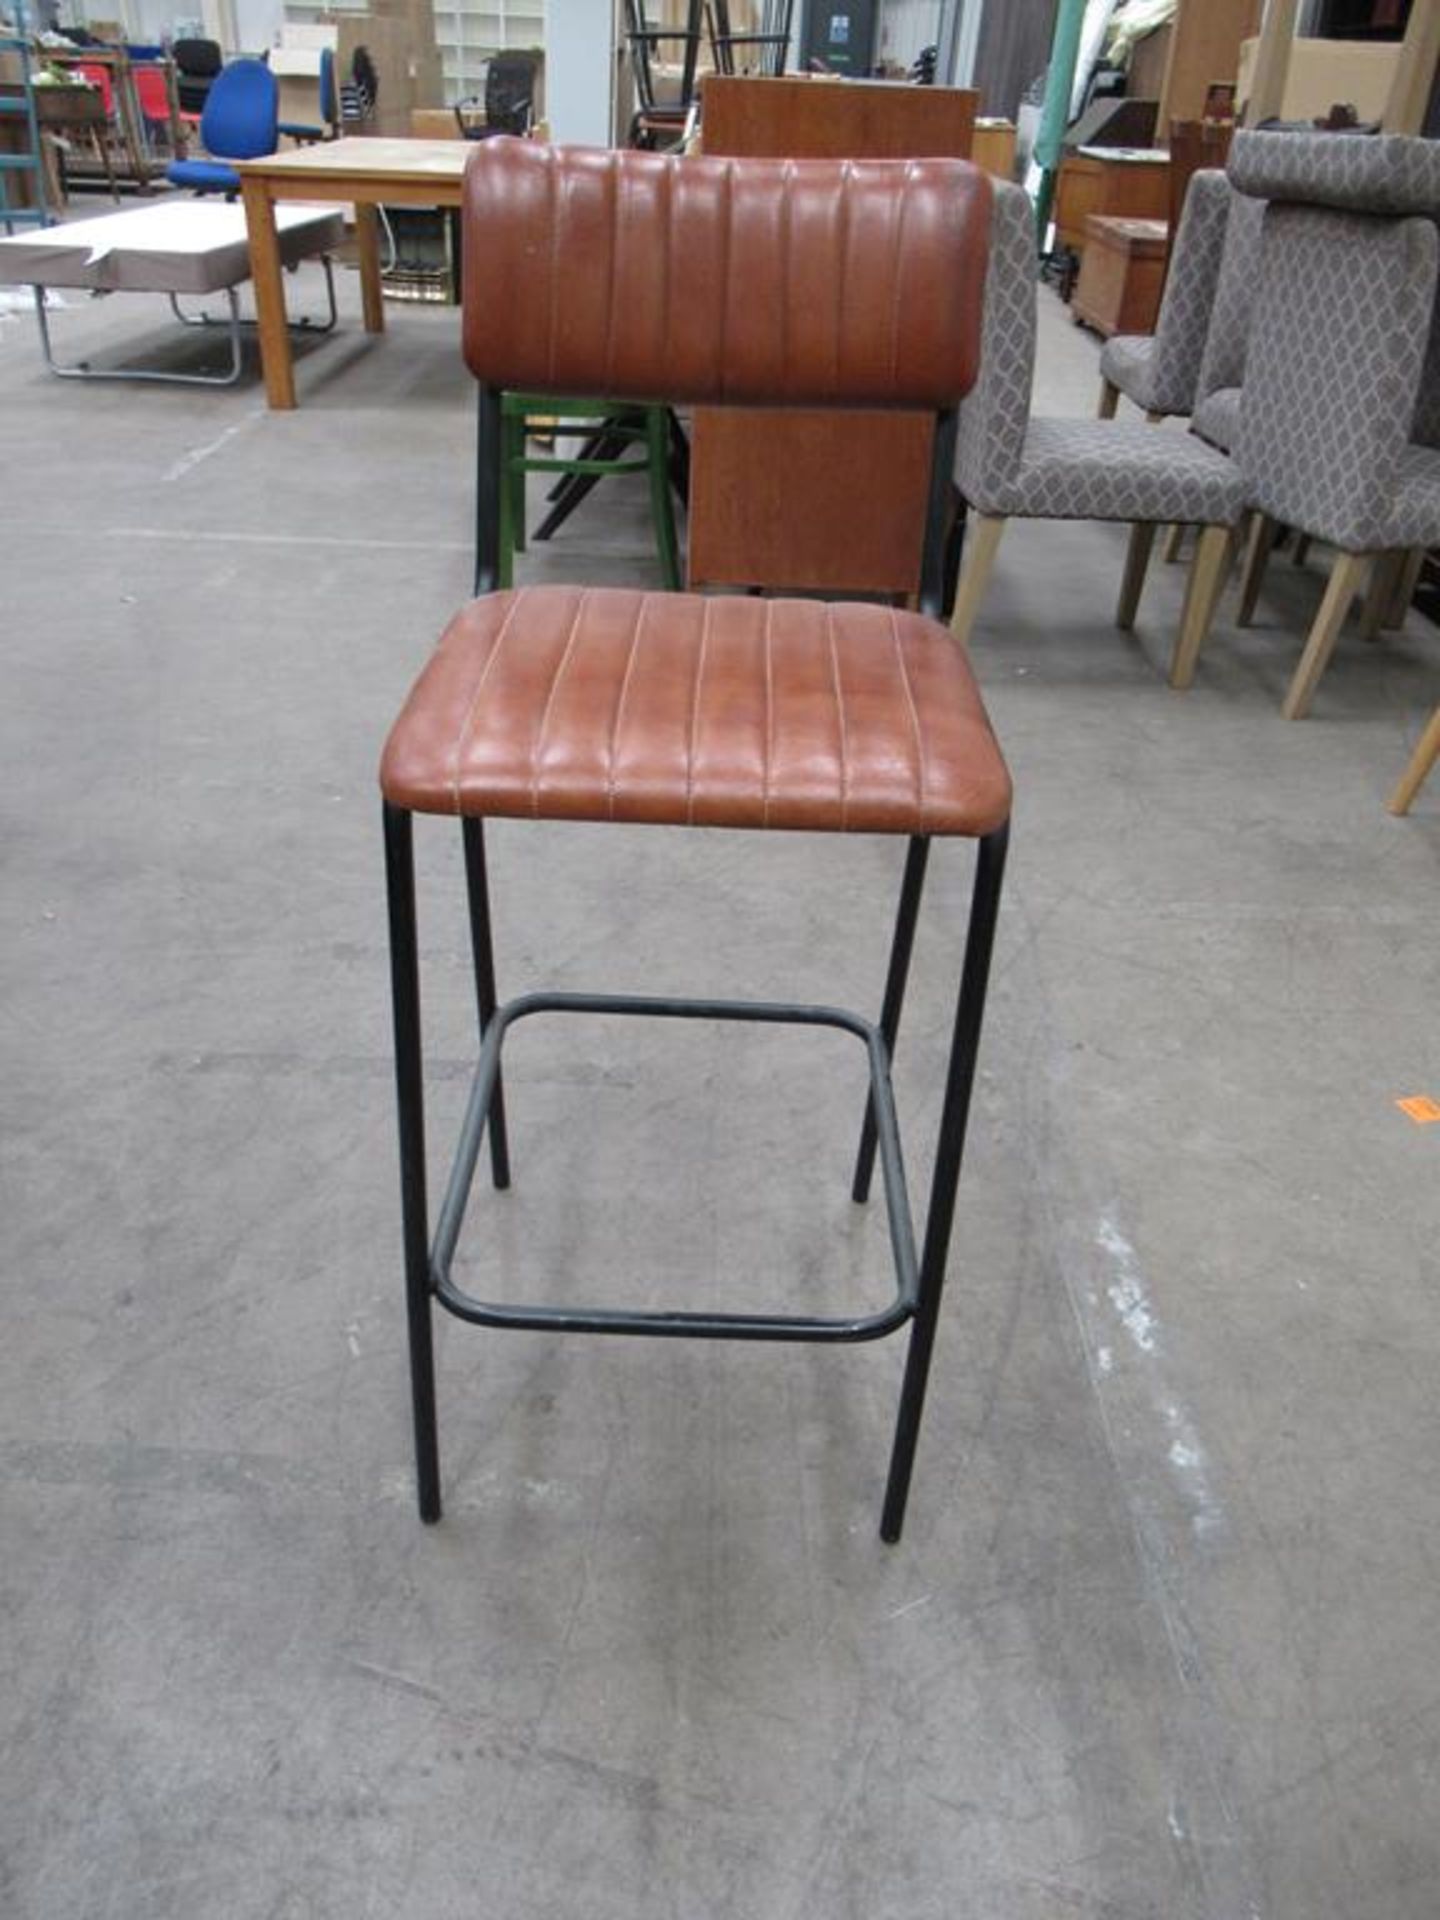 16x Rustic Effect Low Back High Stools